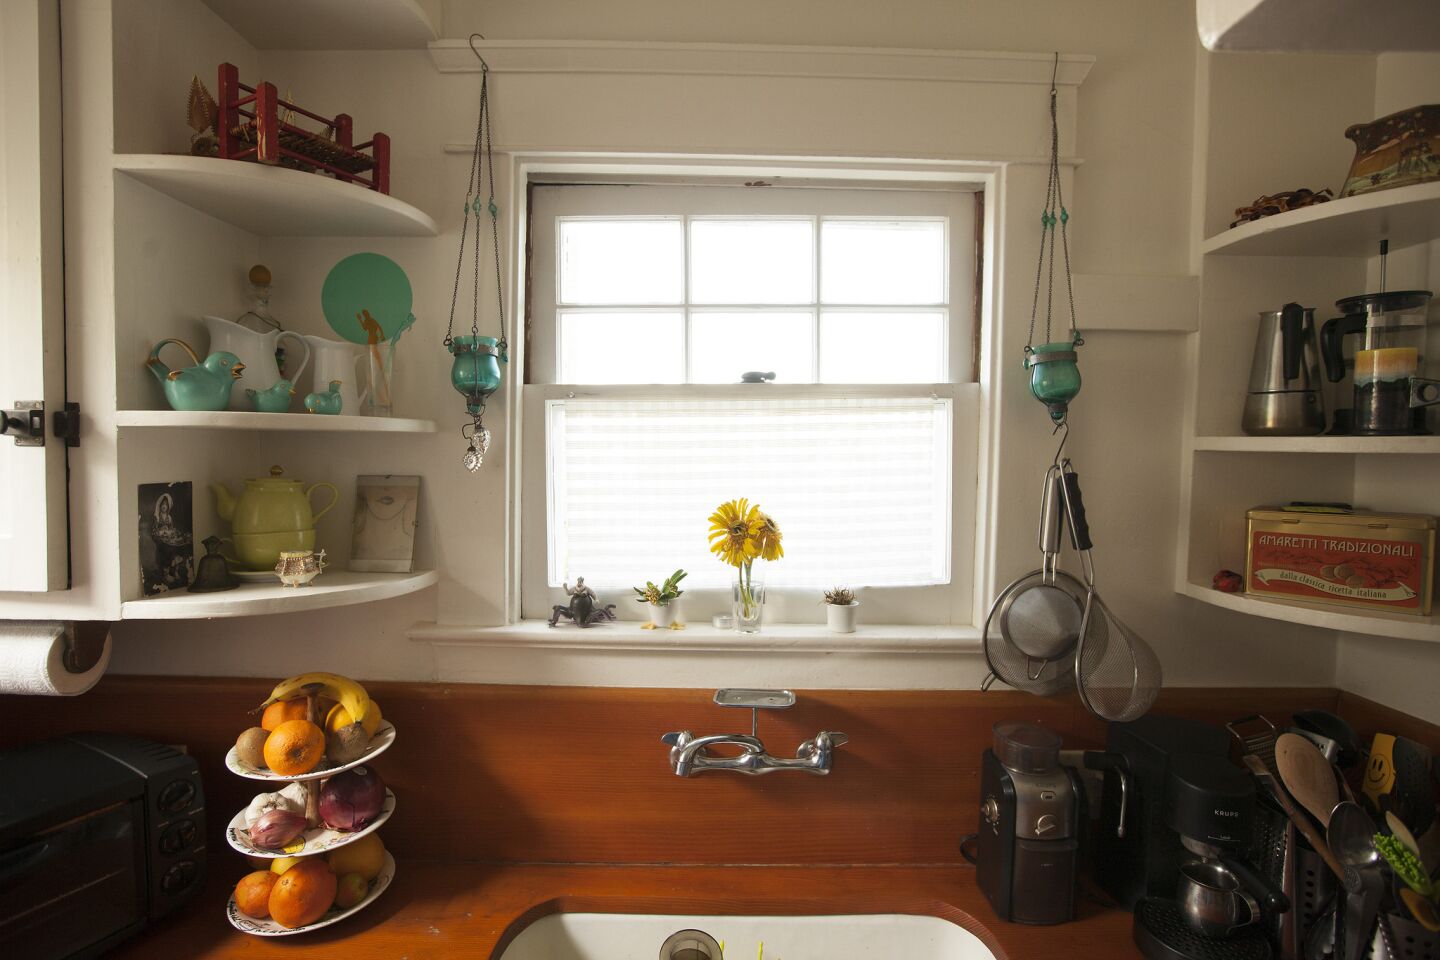 The galley-style kitchen features wood countertops and open shelves.